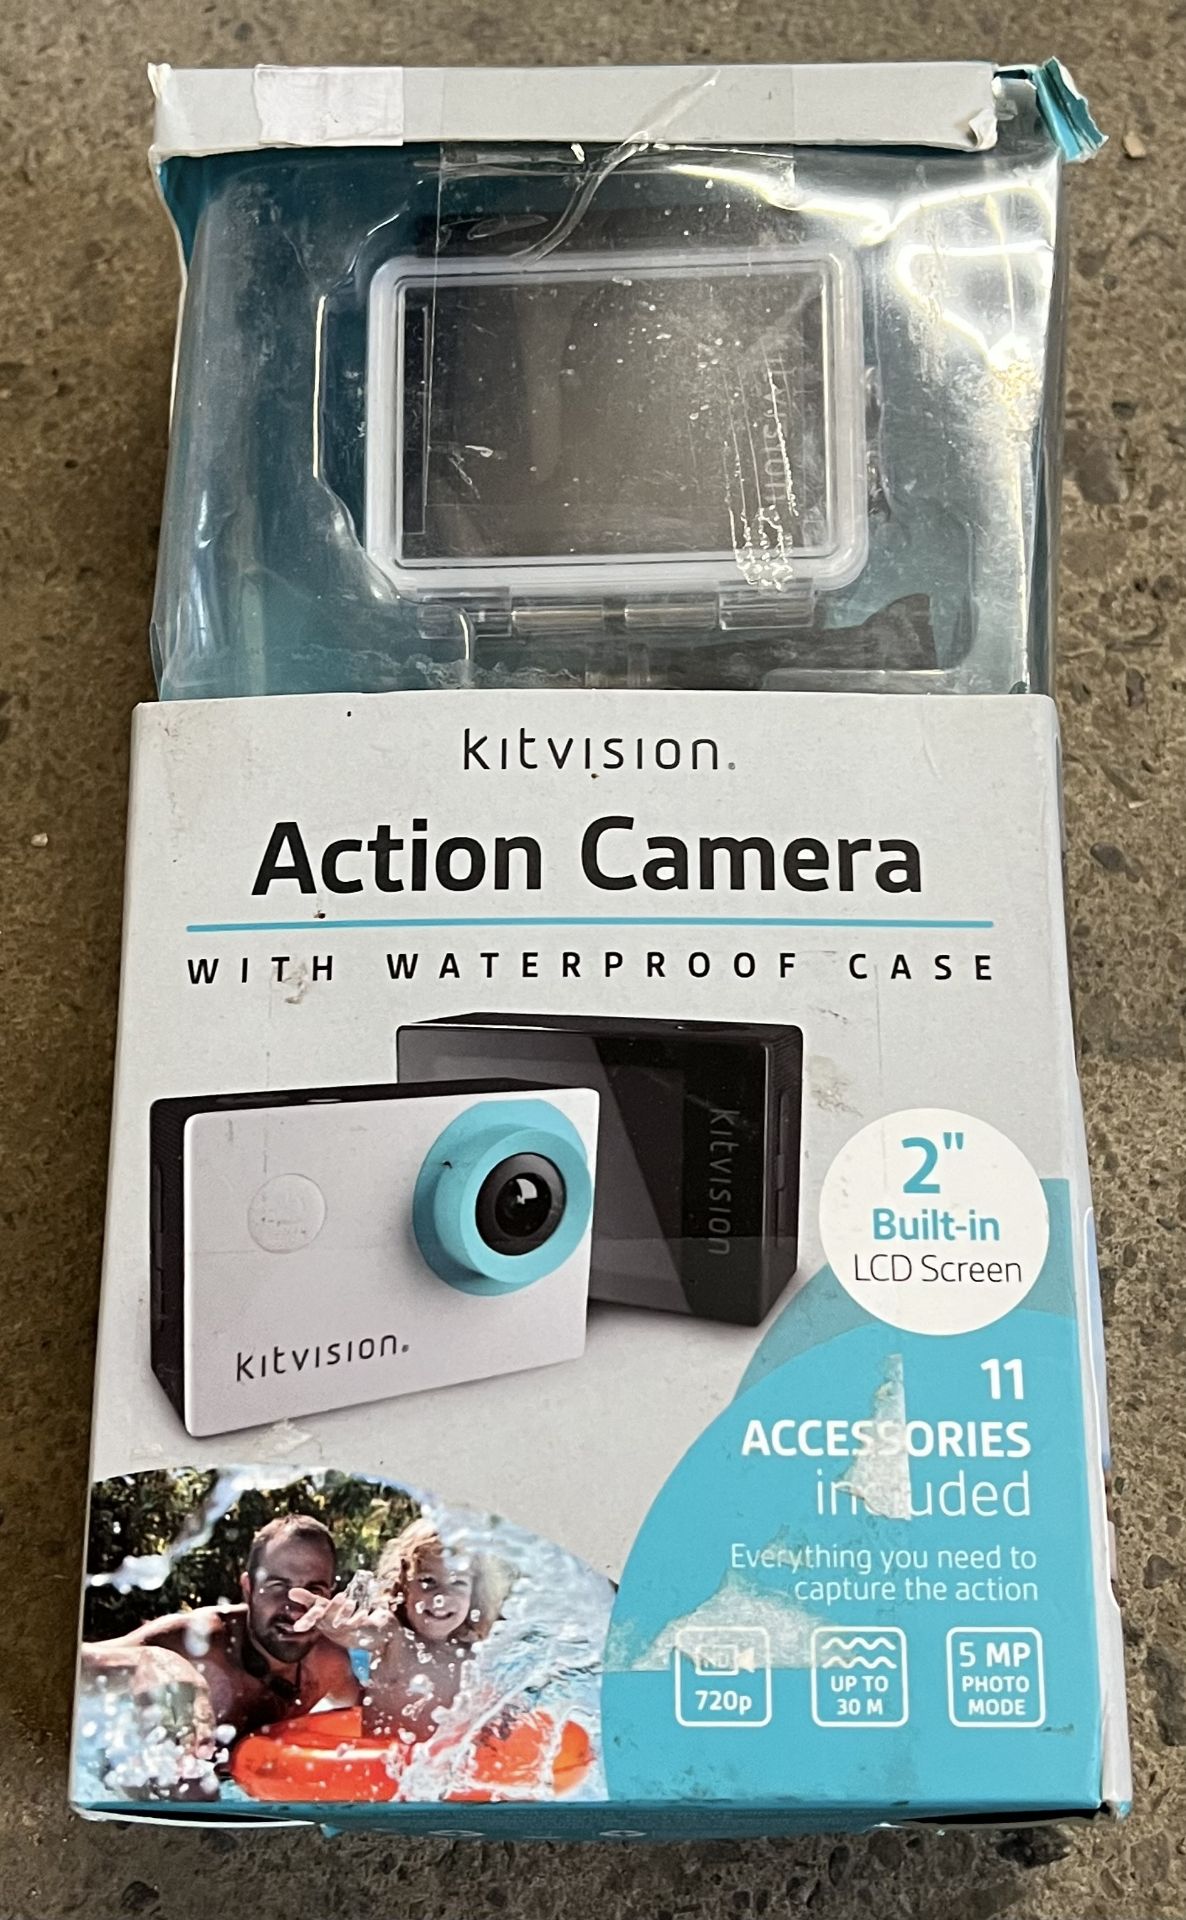 Kitvision 720p Action Camera & Accessories - New and Boxed